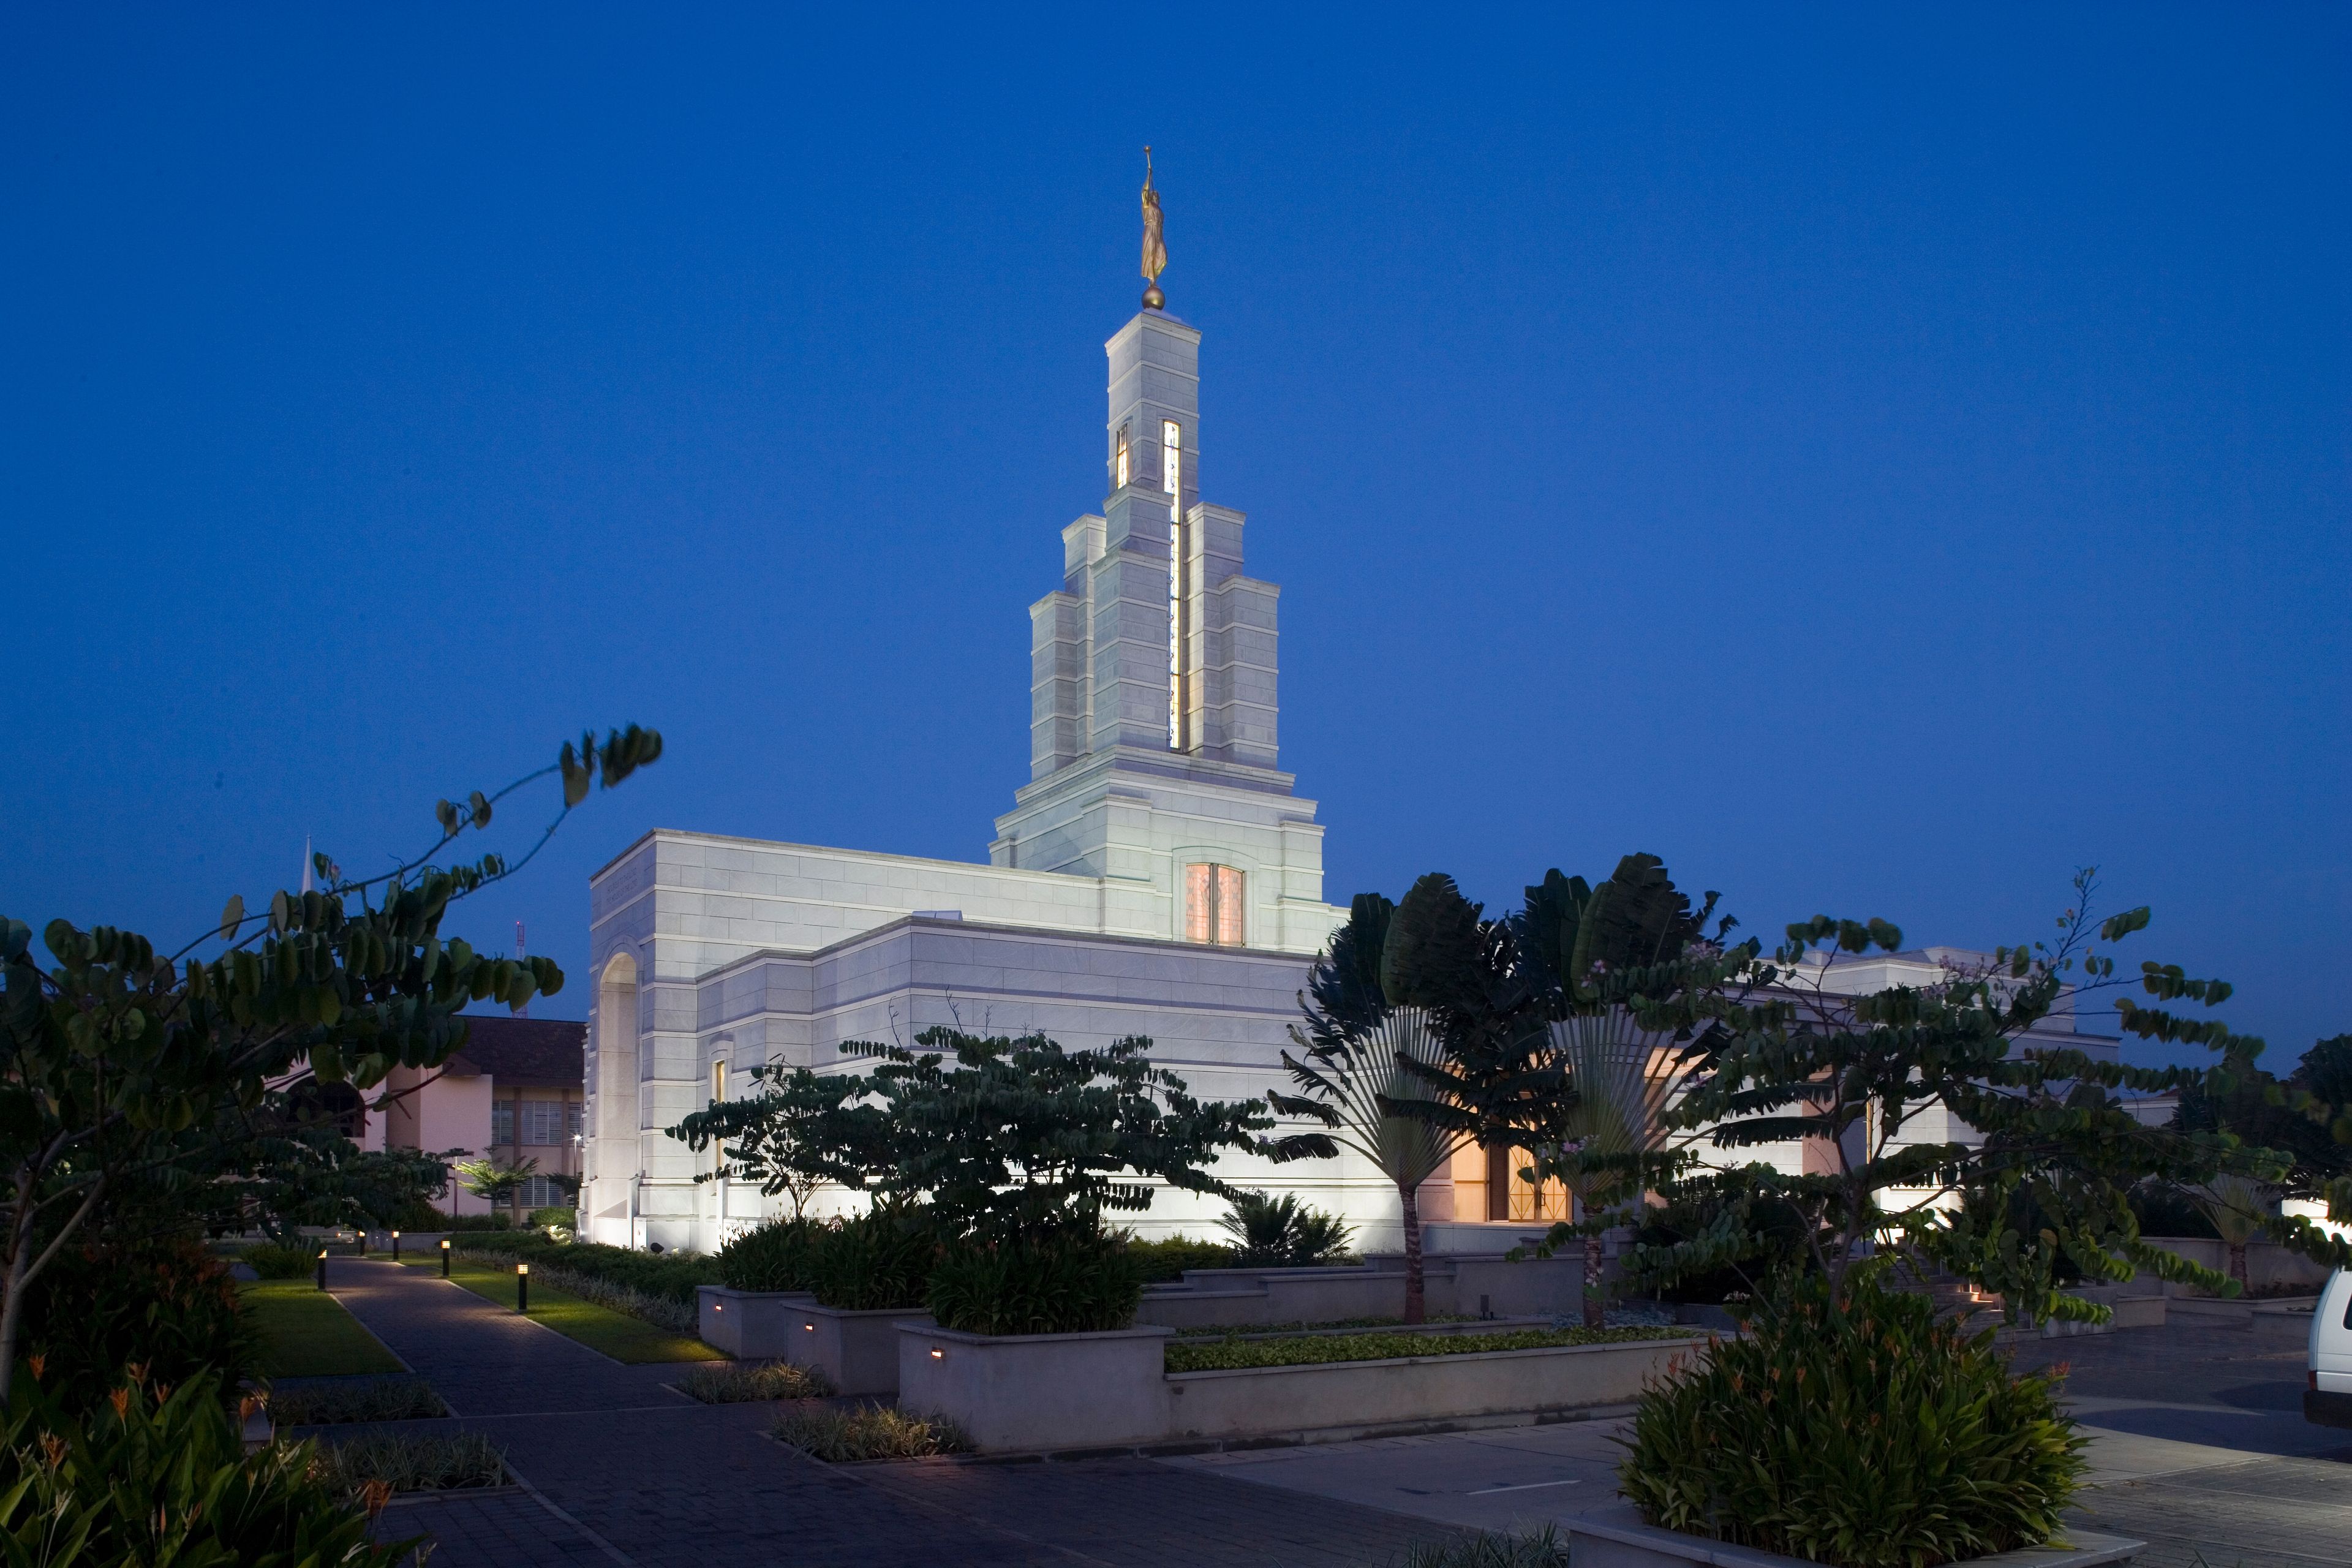 The Accra Ghana Temple and grounds are lit up at night.  